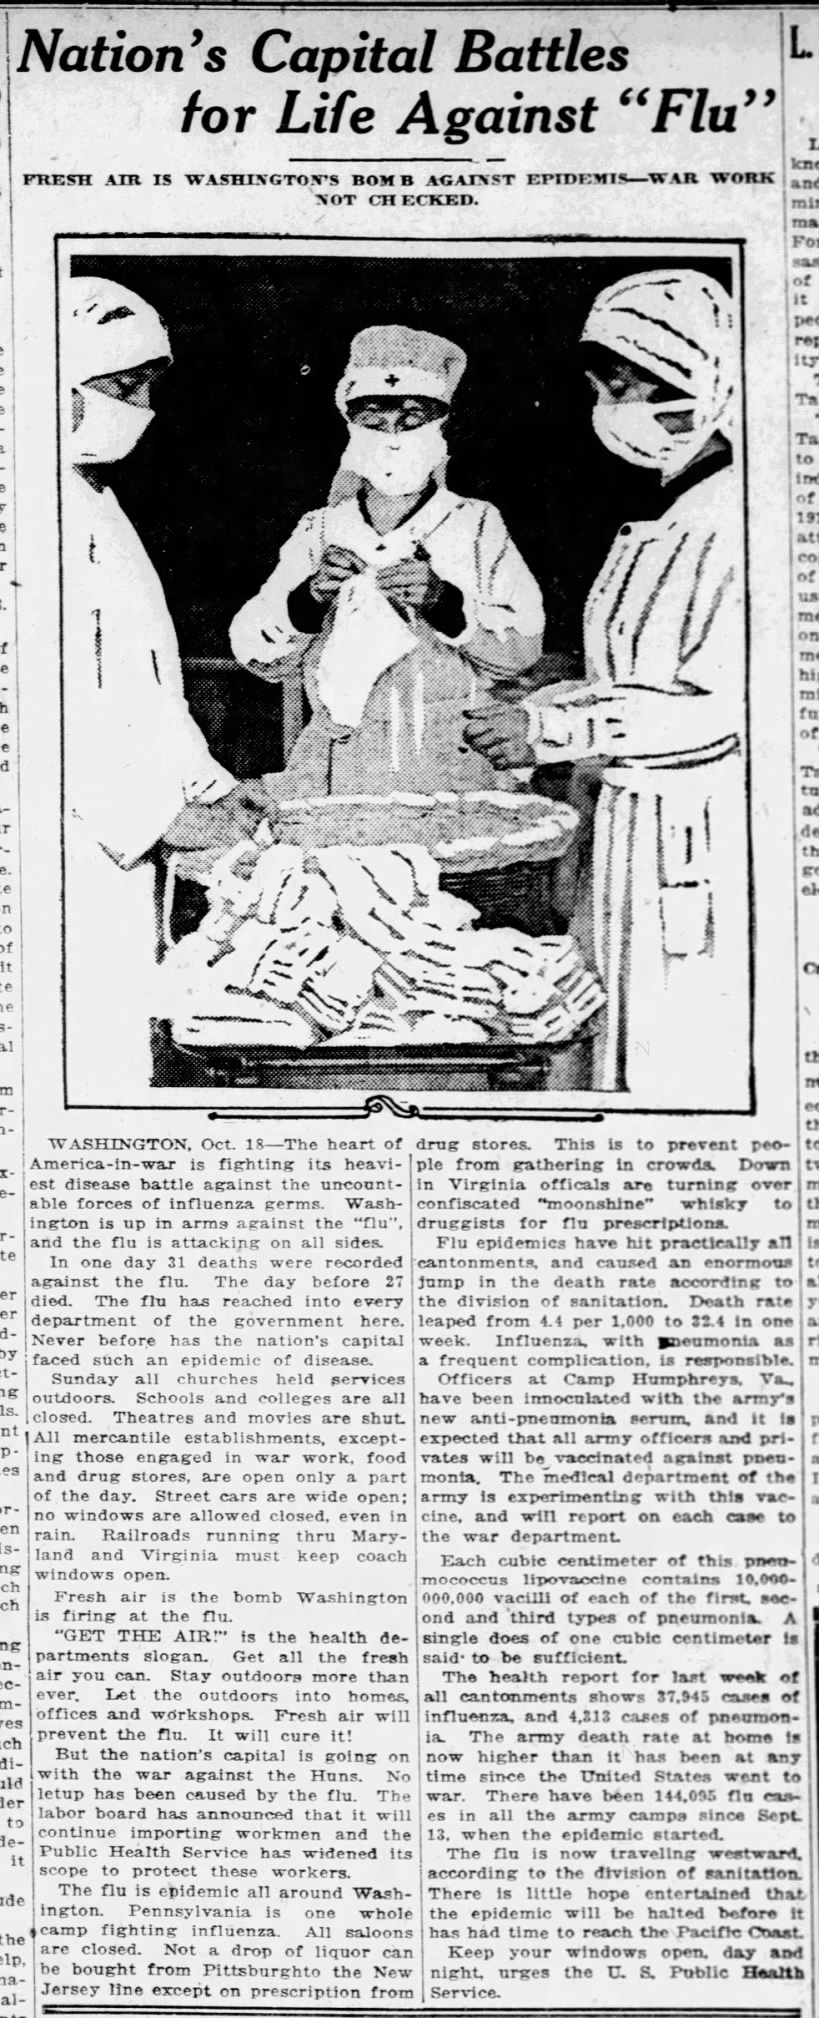 Washington DC is hit with Spanish flu but war industries continue; fresh air is recommended